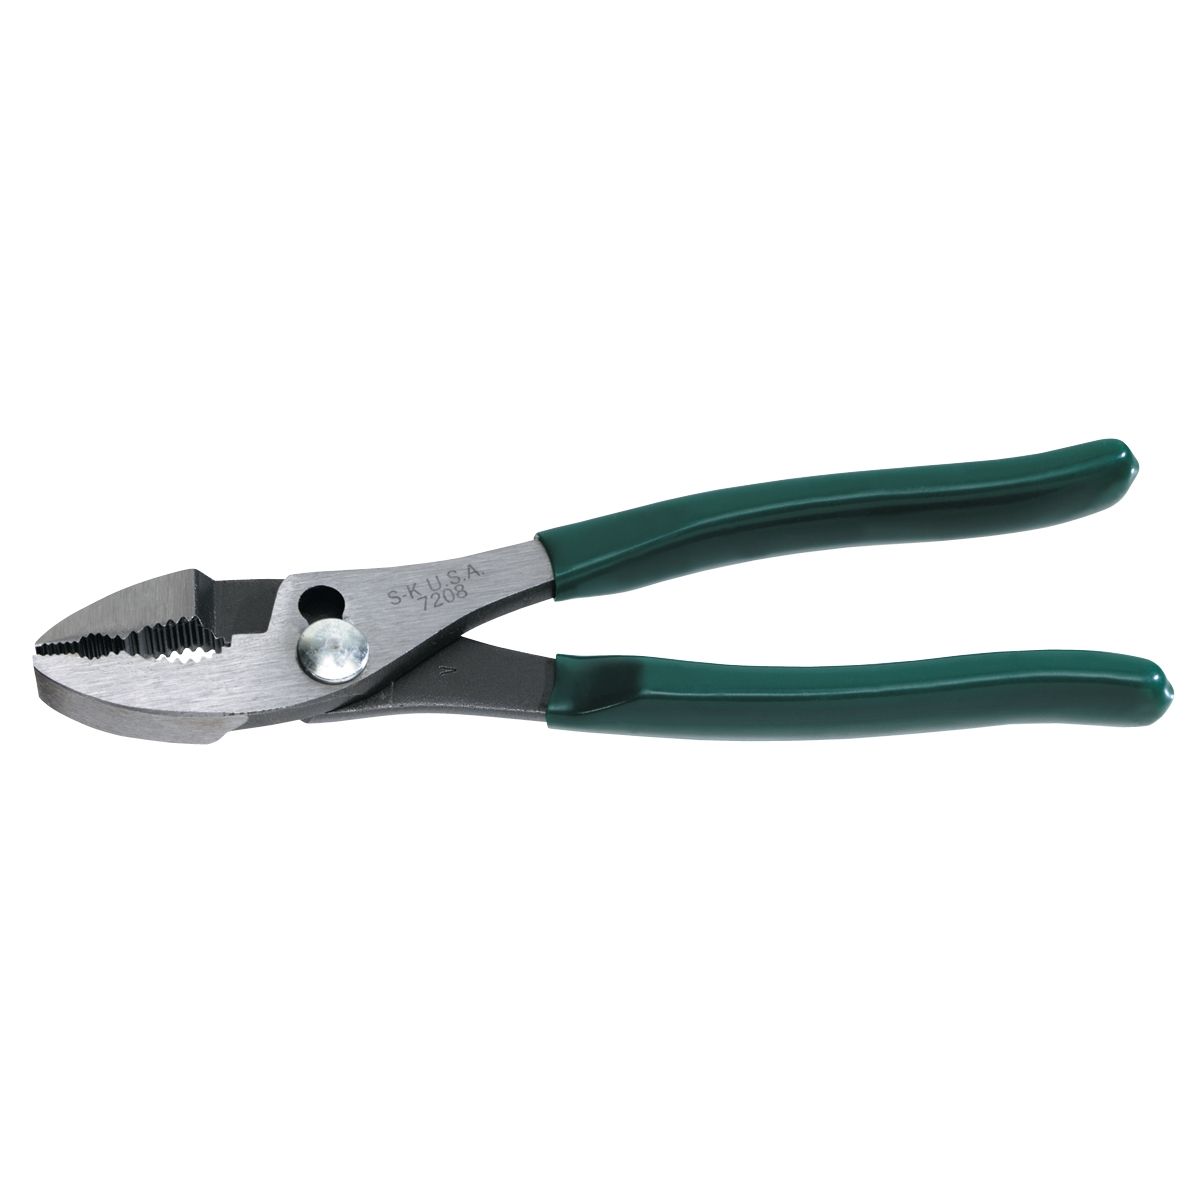 Combination Slip Joint Pliers - 8 In